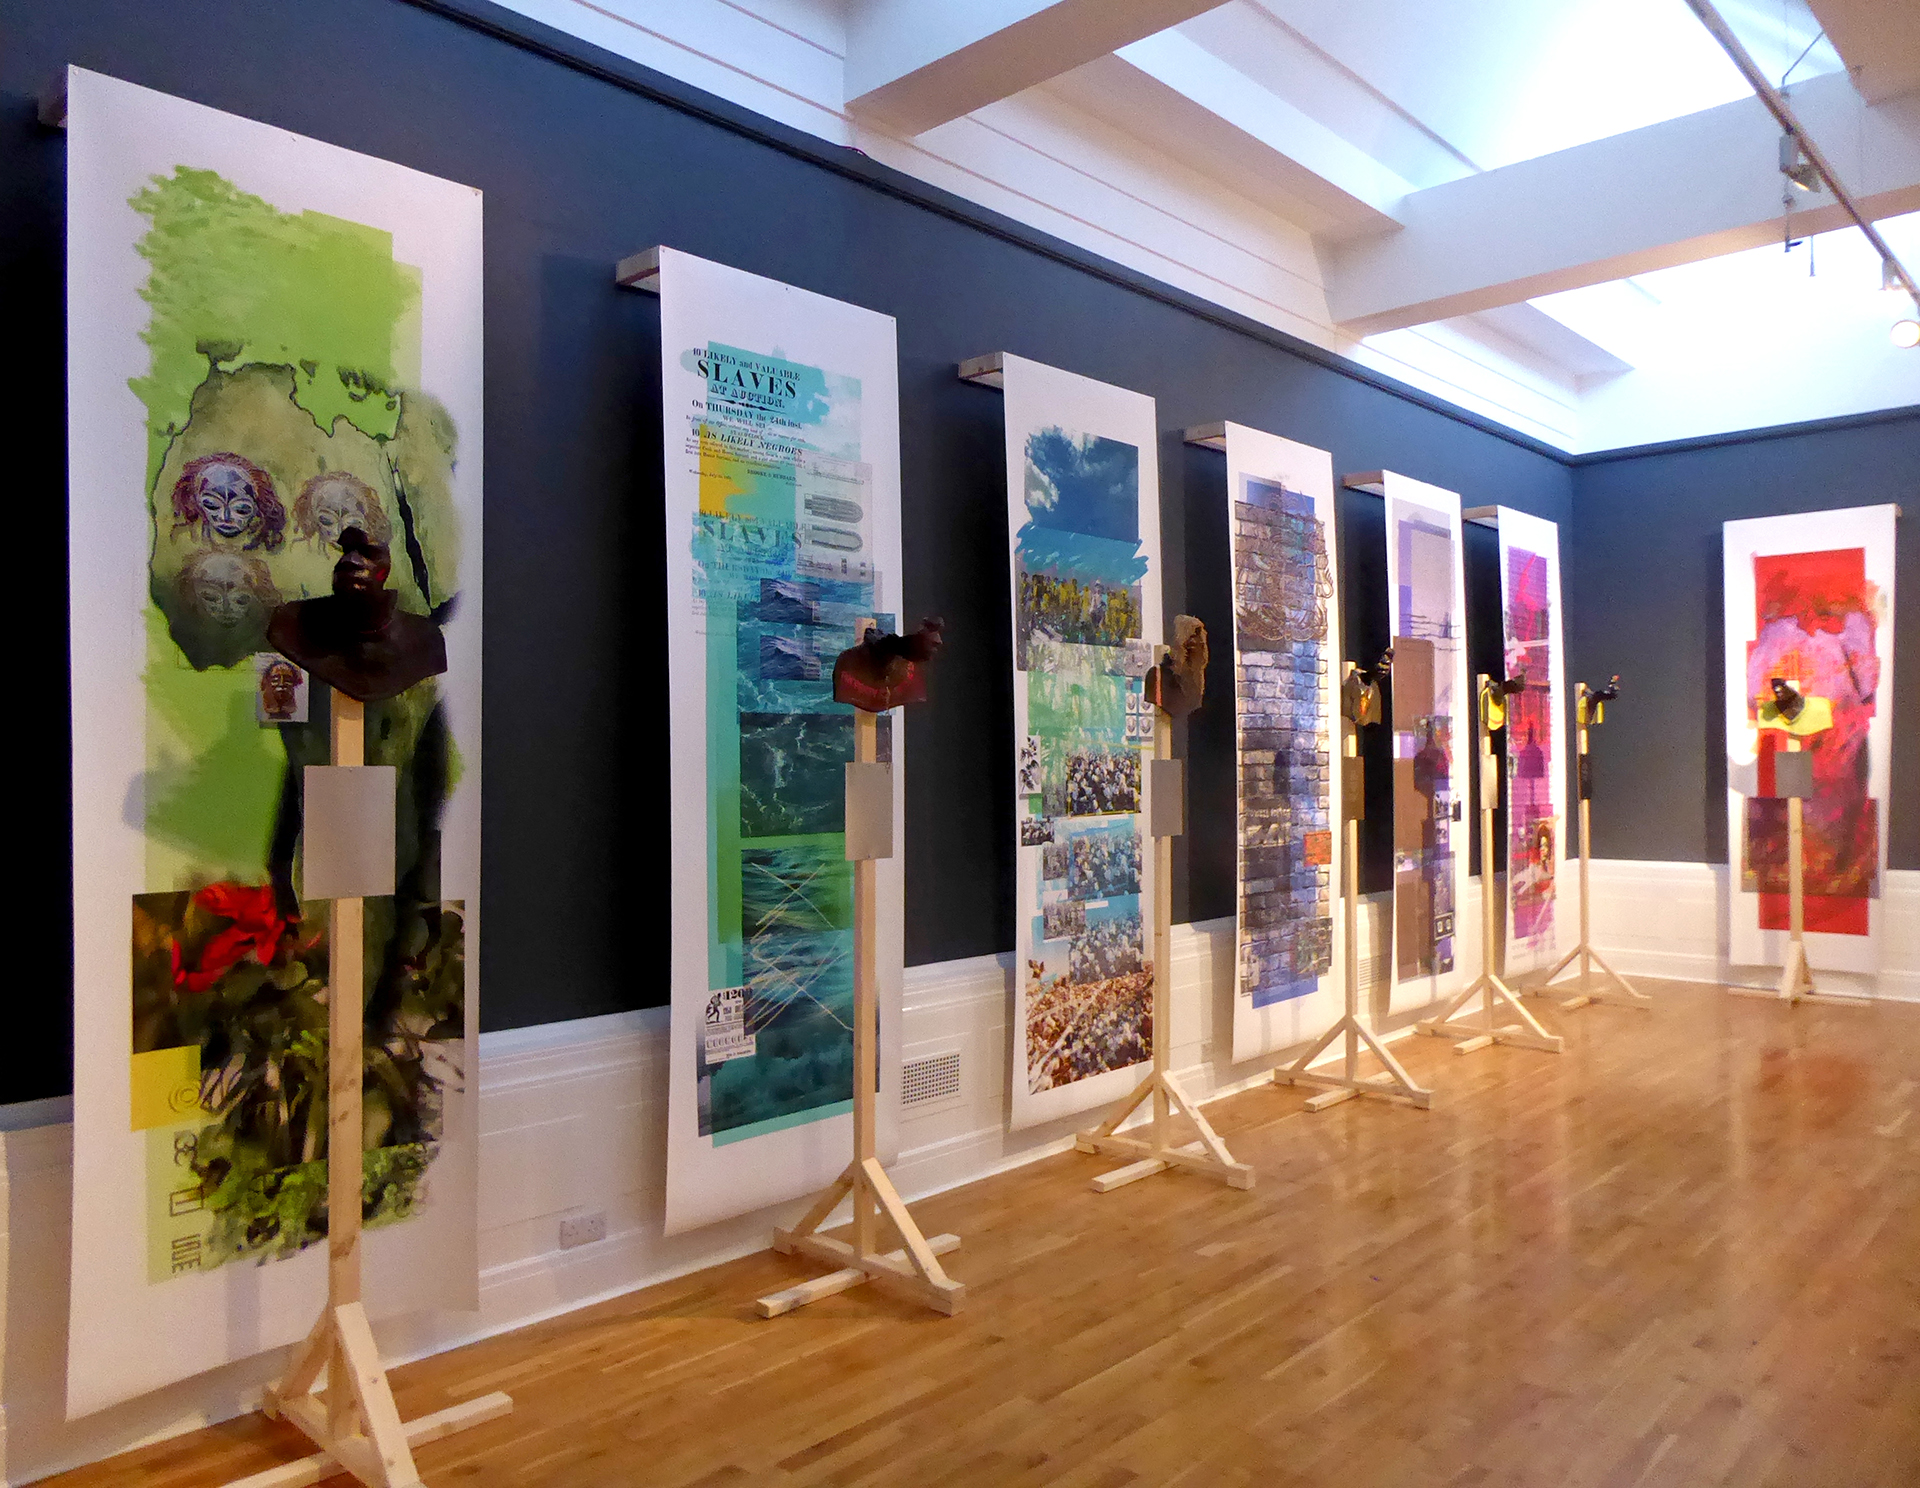 A series of seven hanging, horizontal colourful collages. Each collage has different images from faces to landscapes and brickwork. In front of each collage is a partial sculpture of a head 